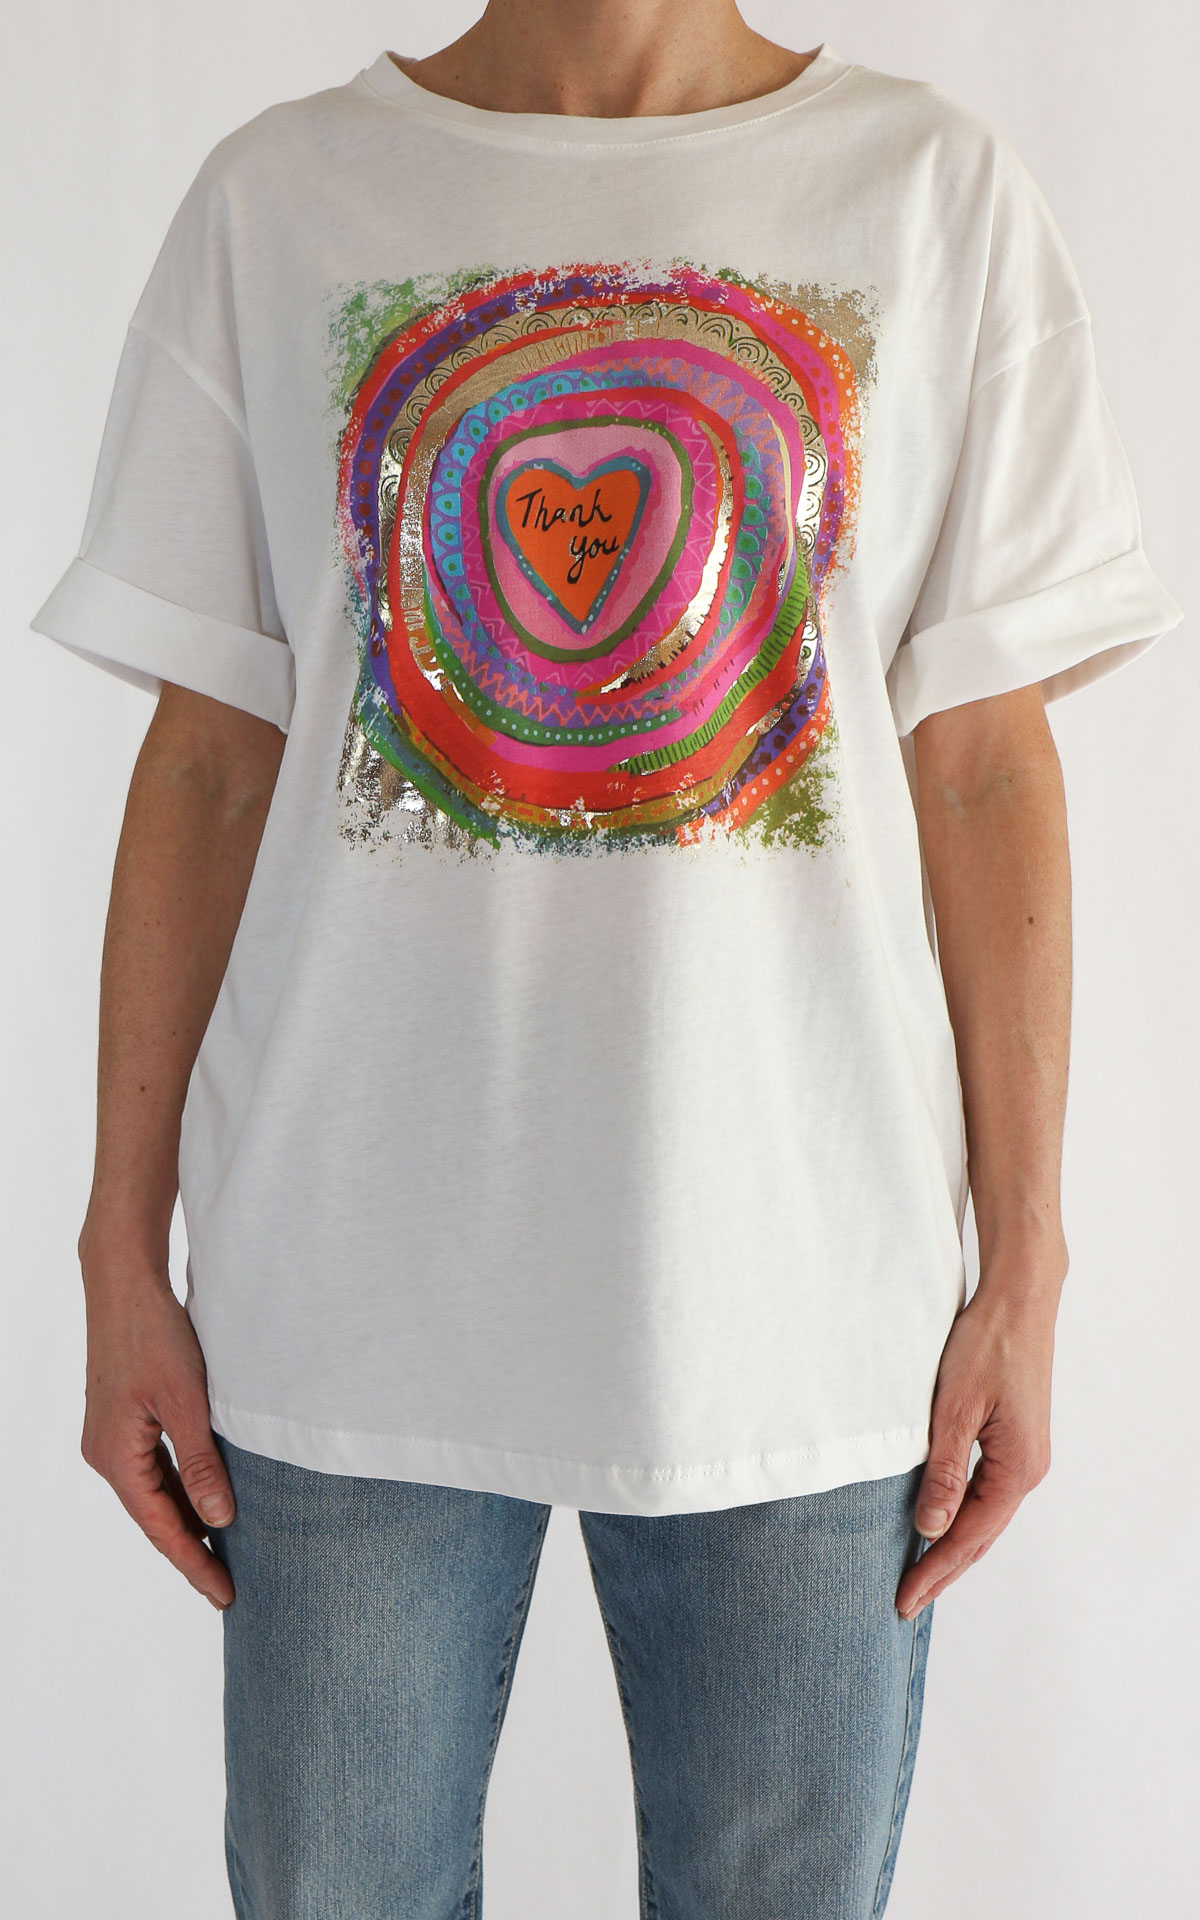 Off-on - T-shirt stampa over - Thank you multicolor